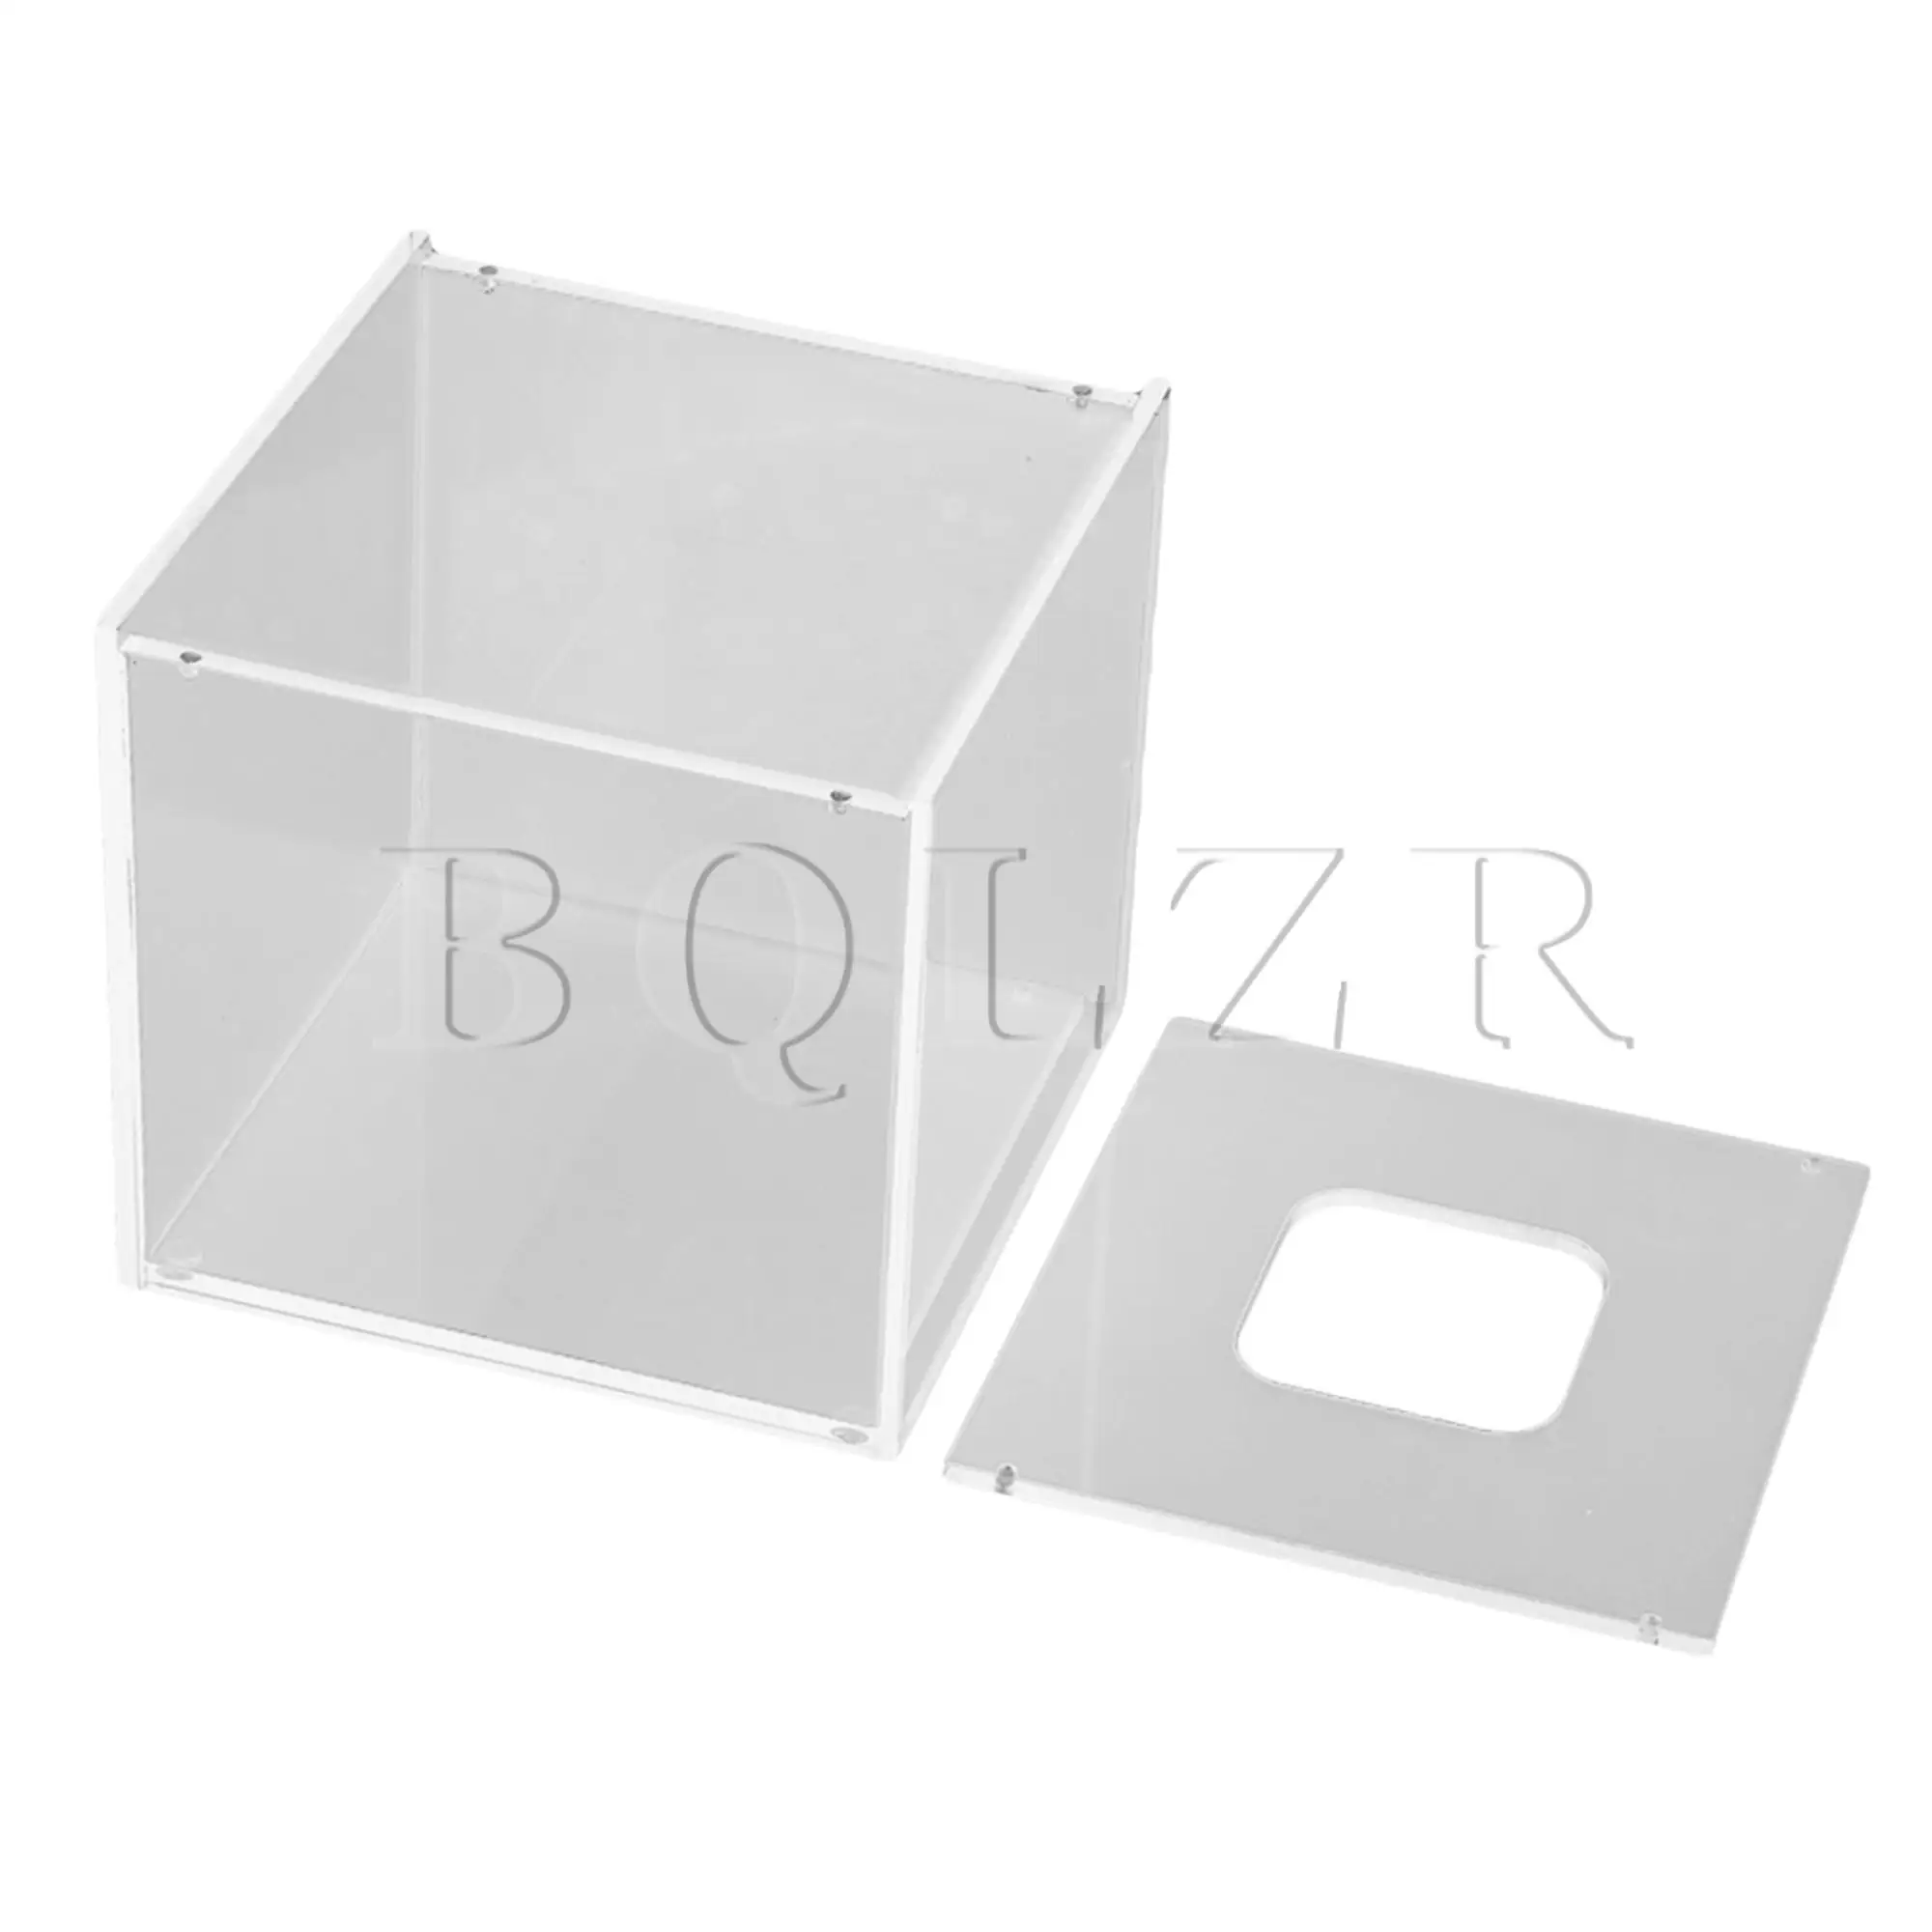 125x125x120mm Storage Box Acrylic Holder Cover Container Transparent 